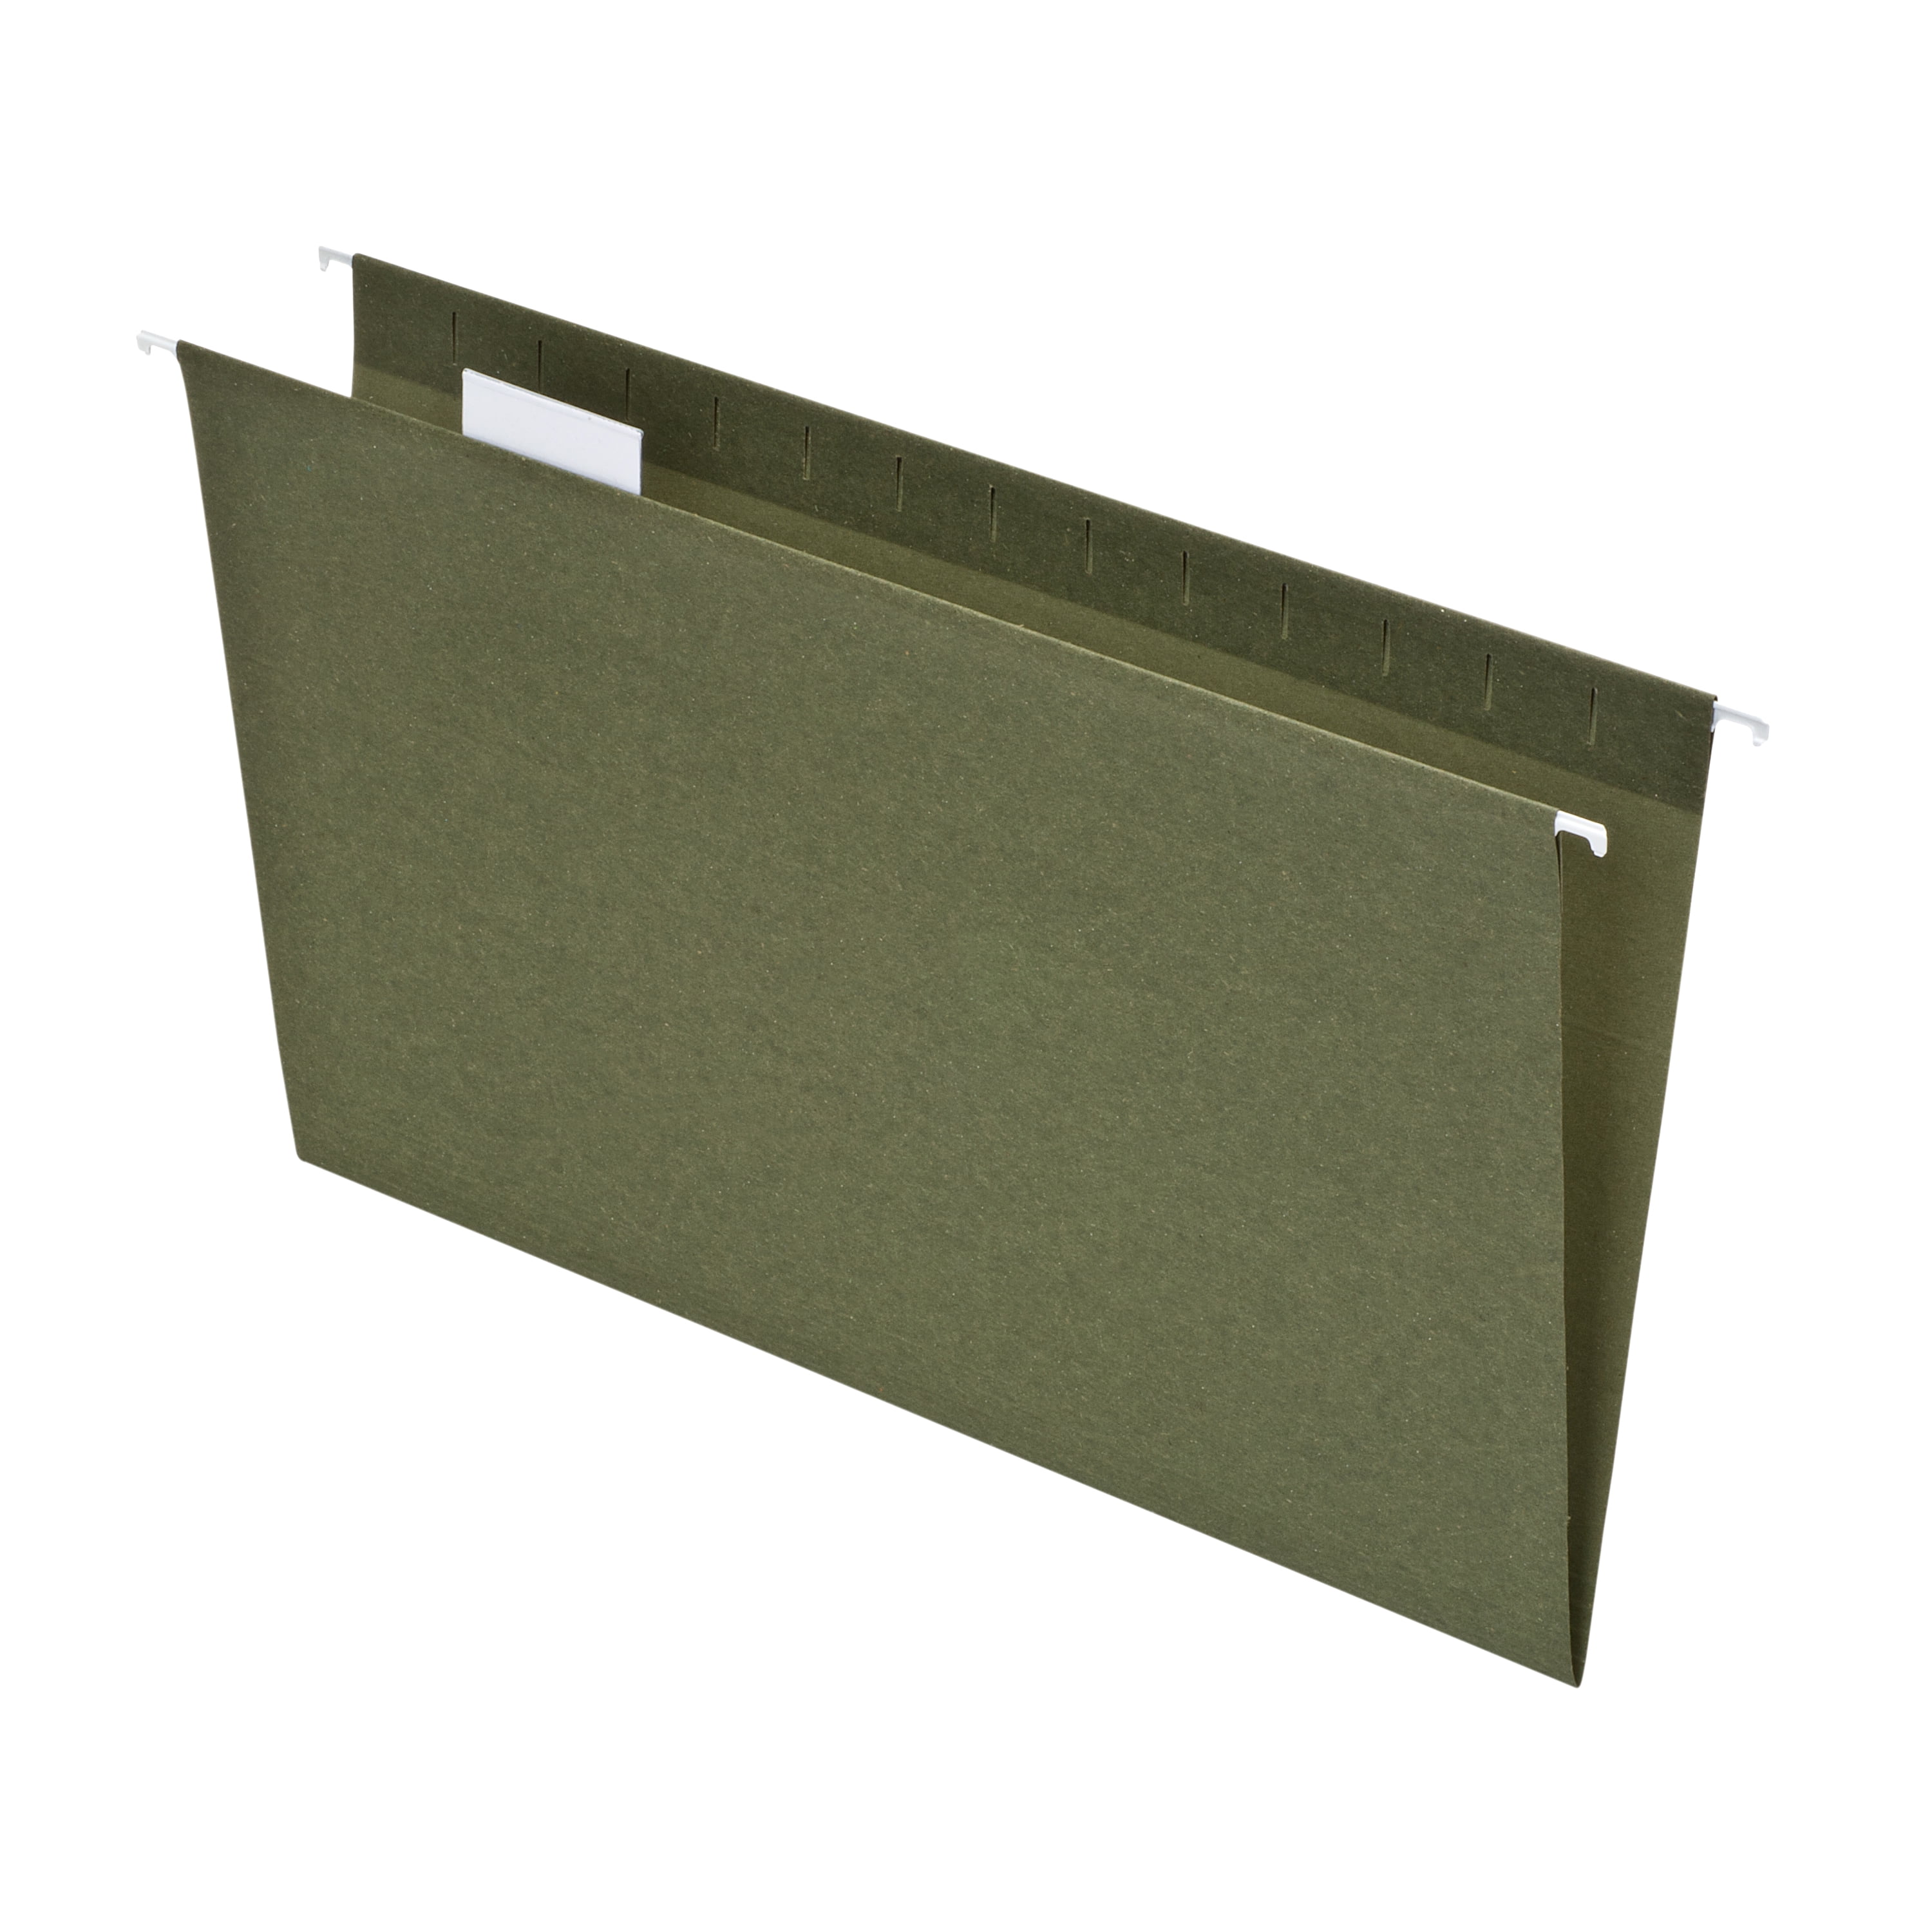 20 A4 Hanging Suspension Files Green Tabs Inserts Filing Cabinet Folders Set 